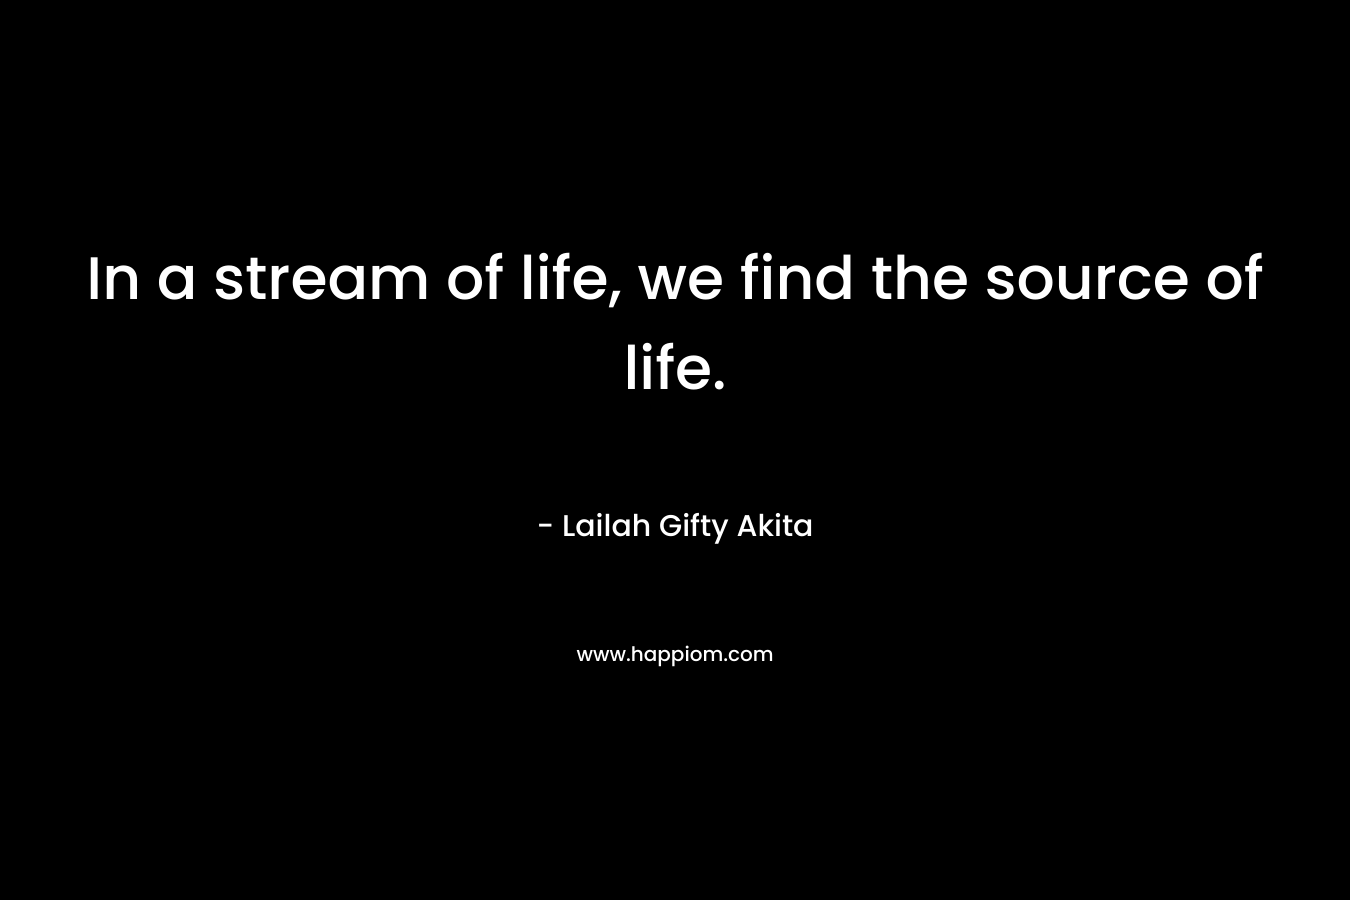 In a stream of life, we find the source of life.